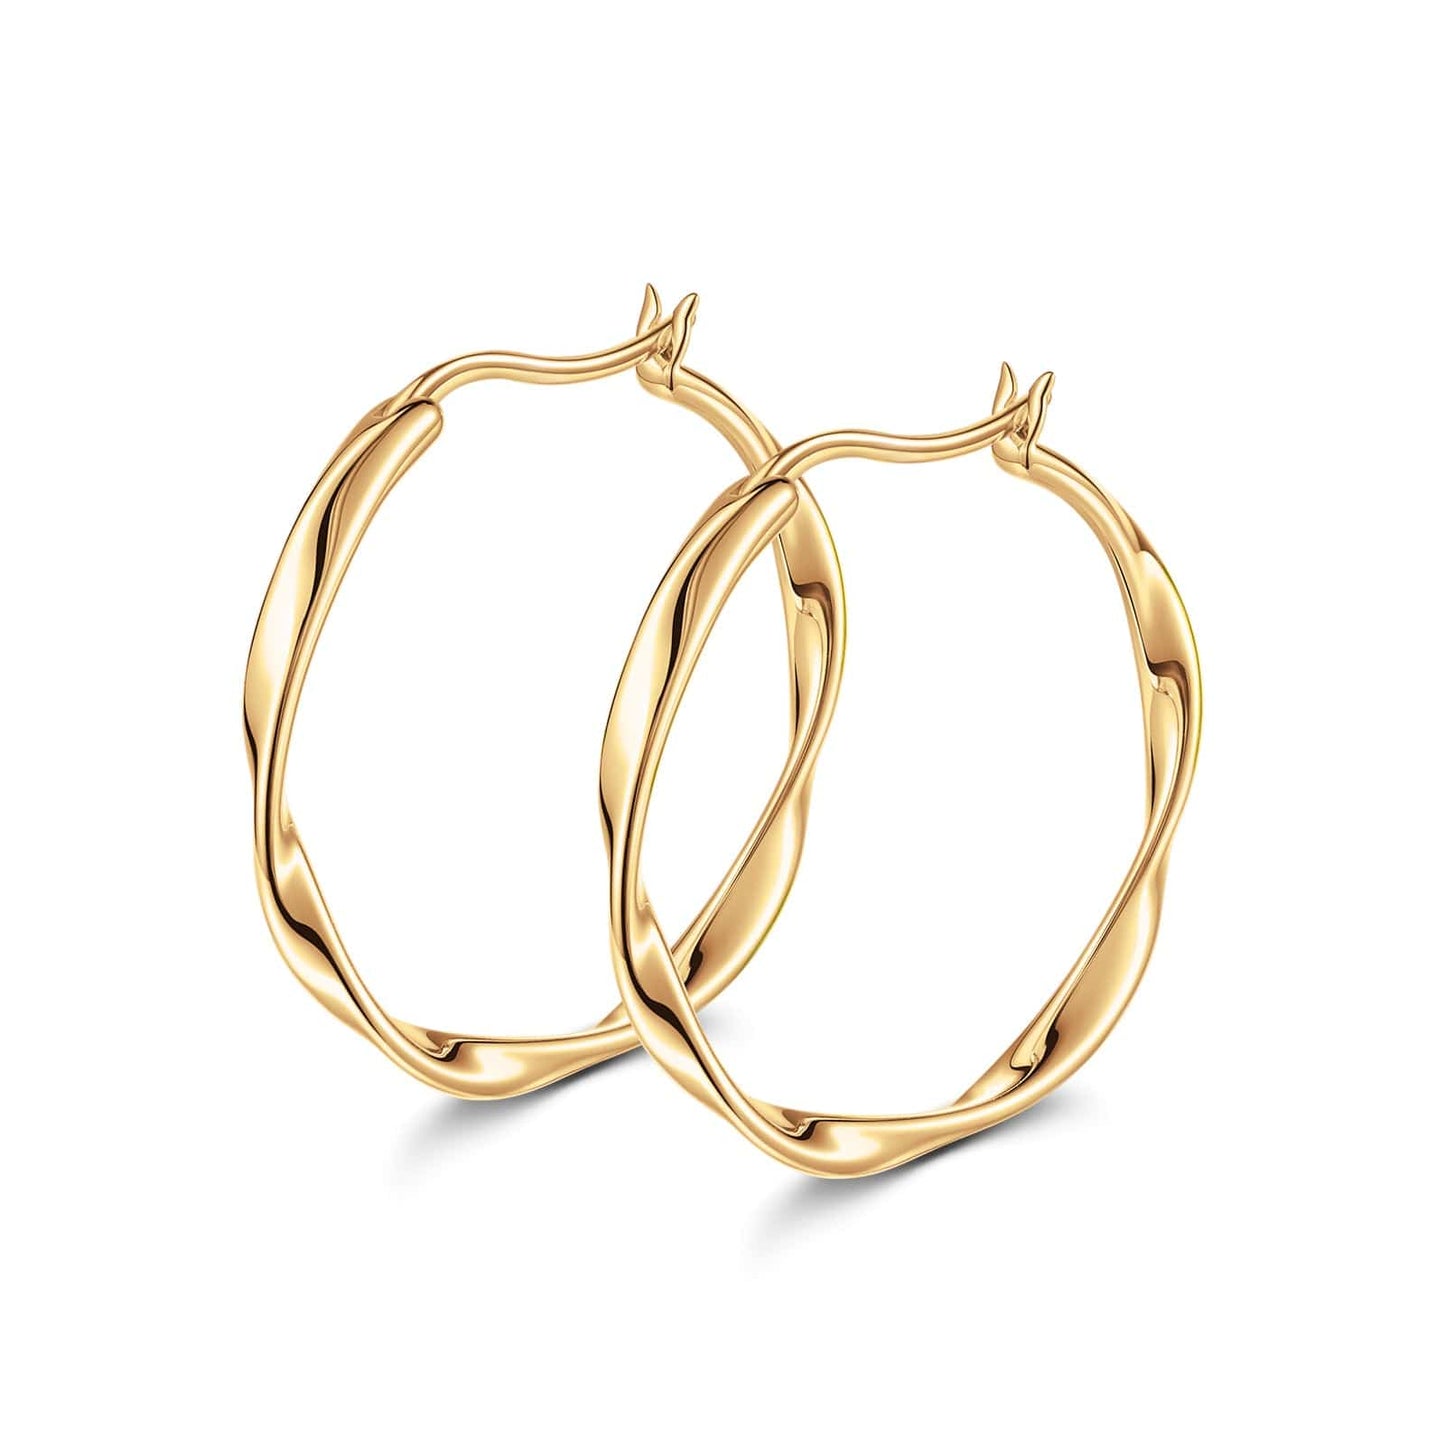 Tarnish-resistant Silver M Size Classic Hoop Earrings with Sterling Silver Ear Post In 14K Gold Plated